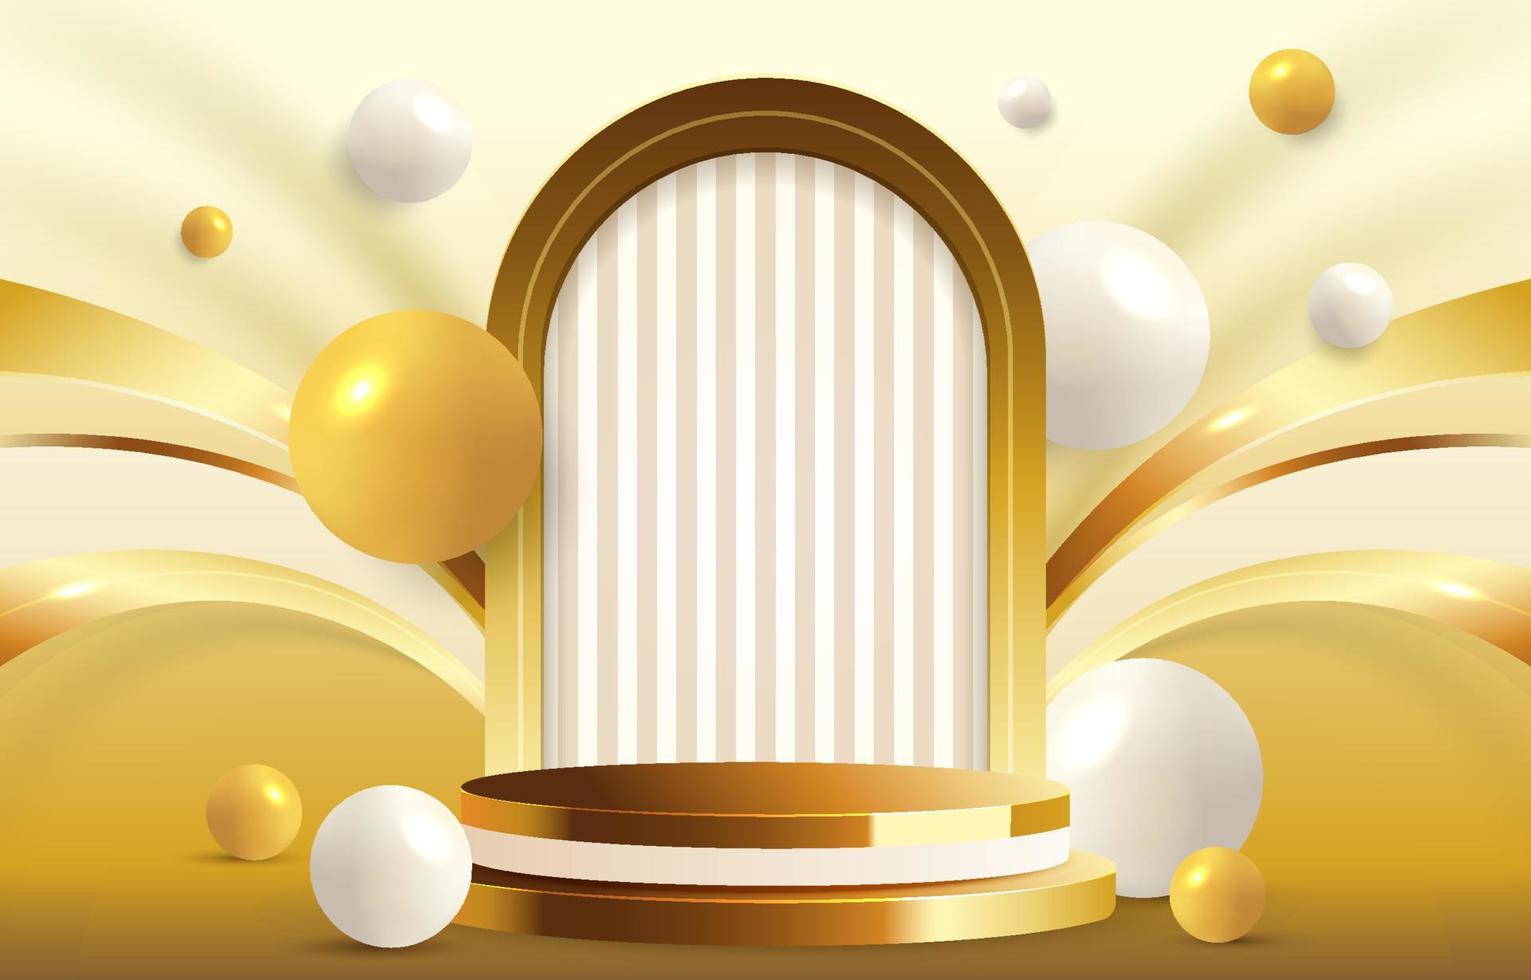 Gold and White Podium Background vector